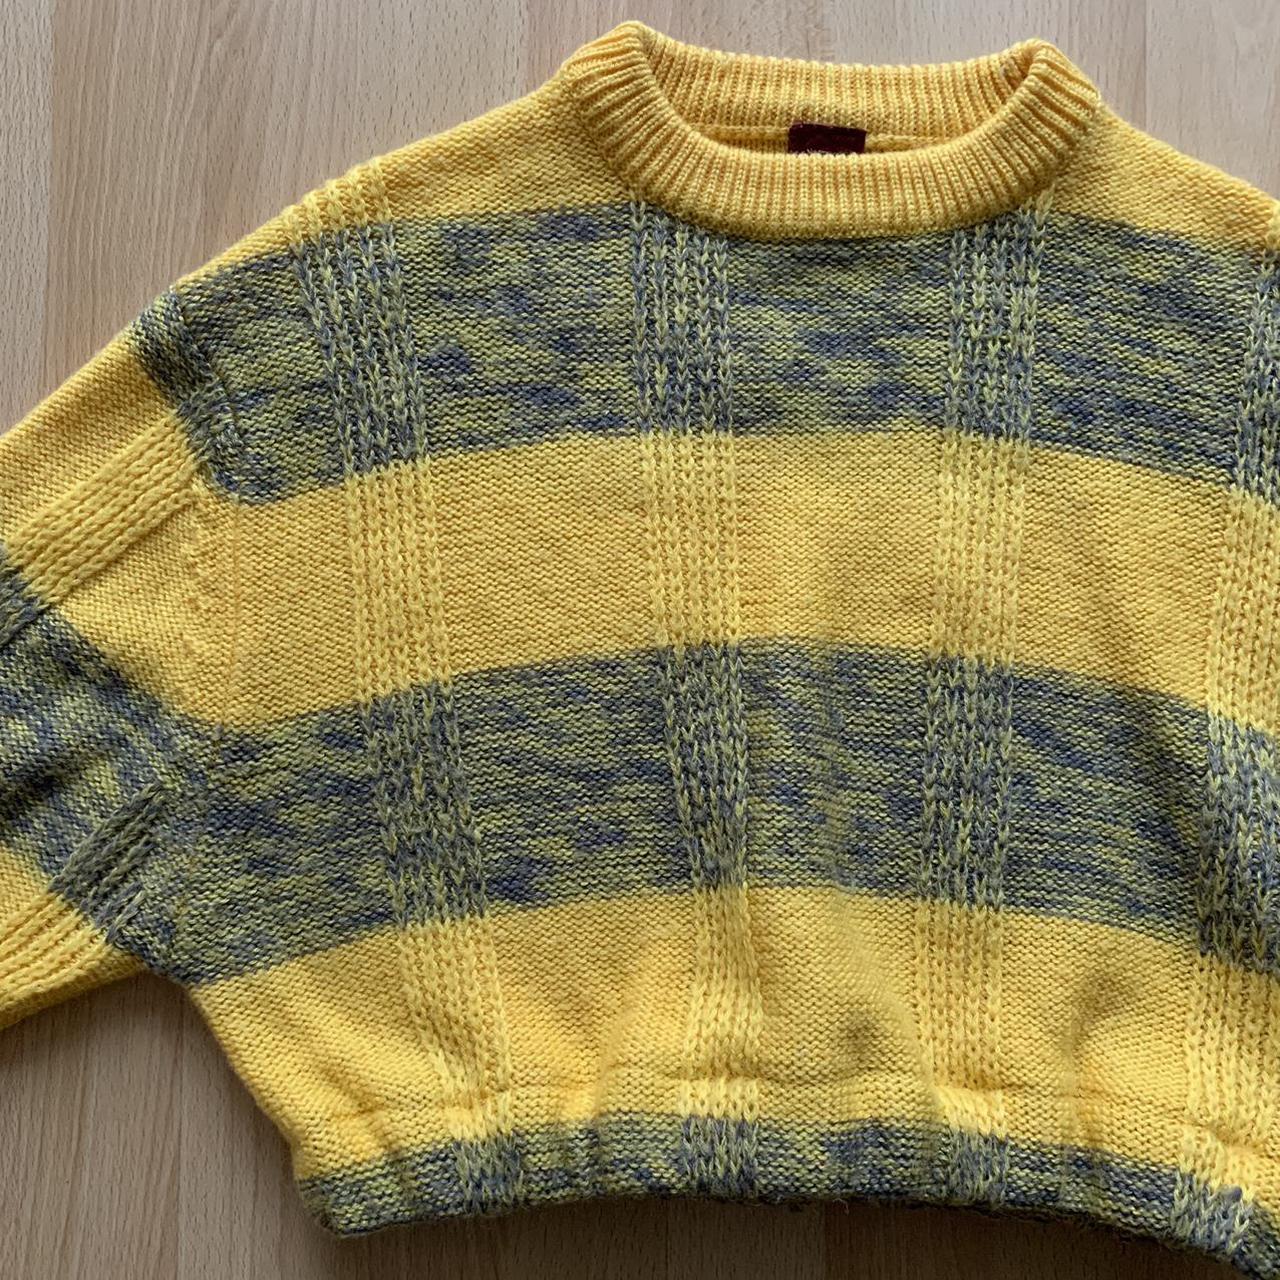 Product Image 3 - Adorable yellow striped sweater reworked